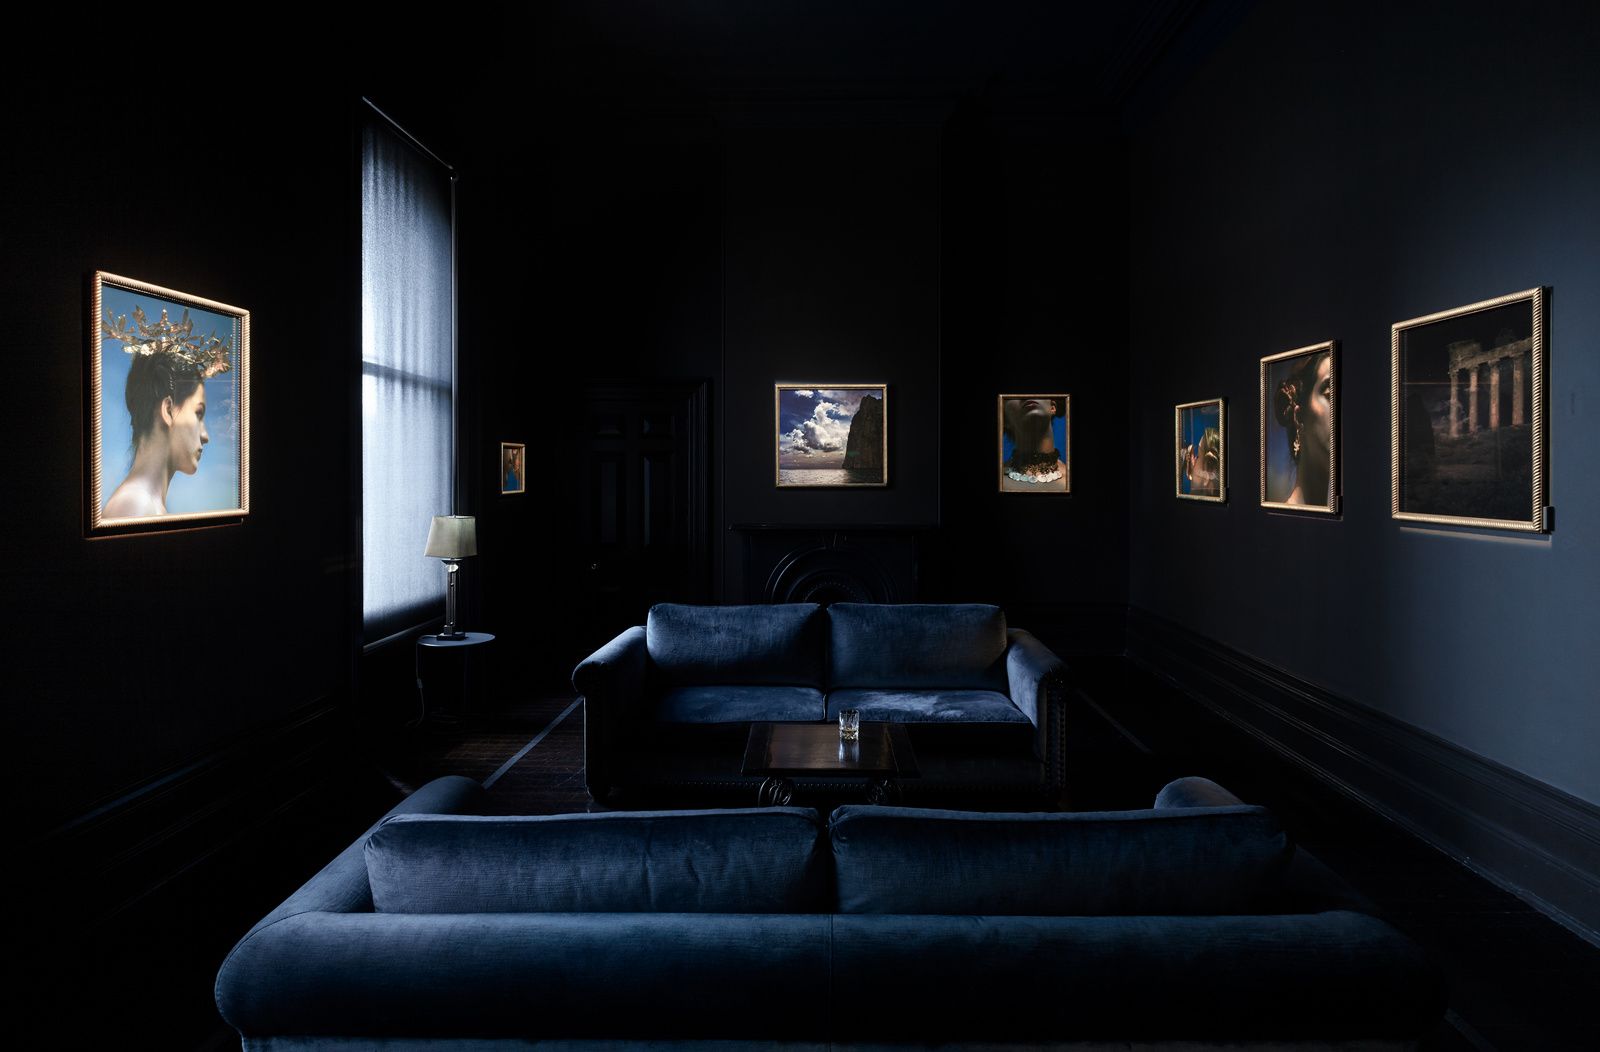 Dimly-lit room with six illuminated framed photographs on the walls with two dark blue sofas